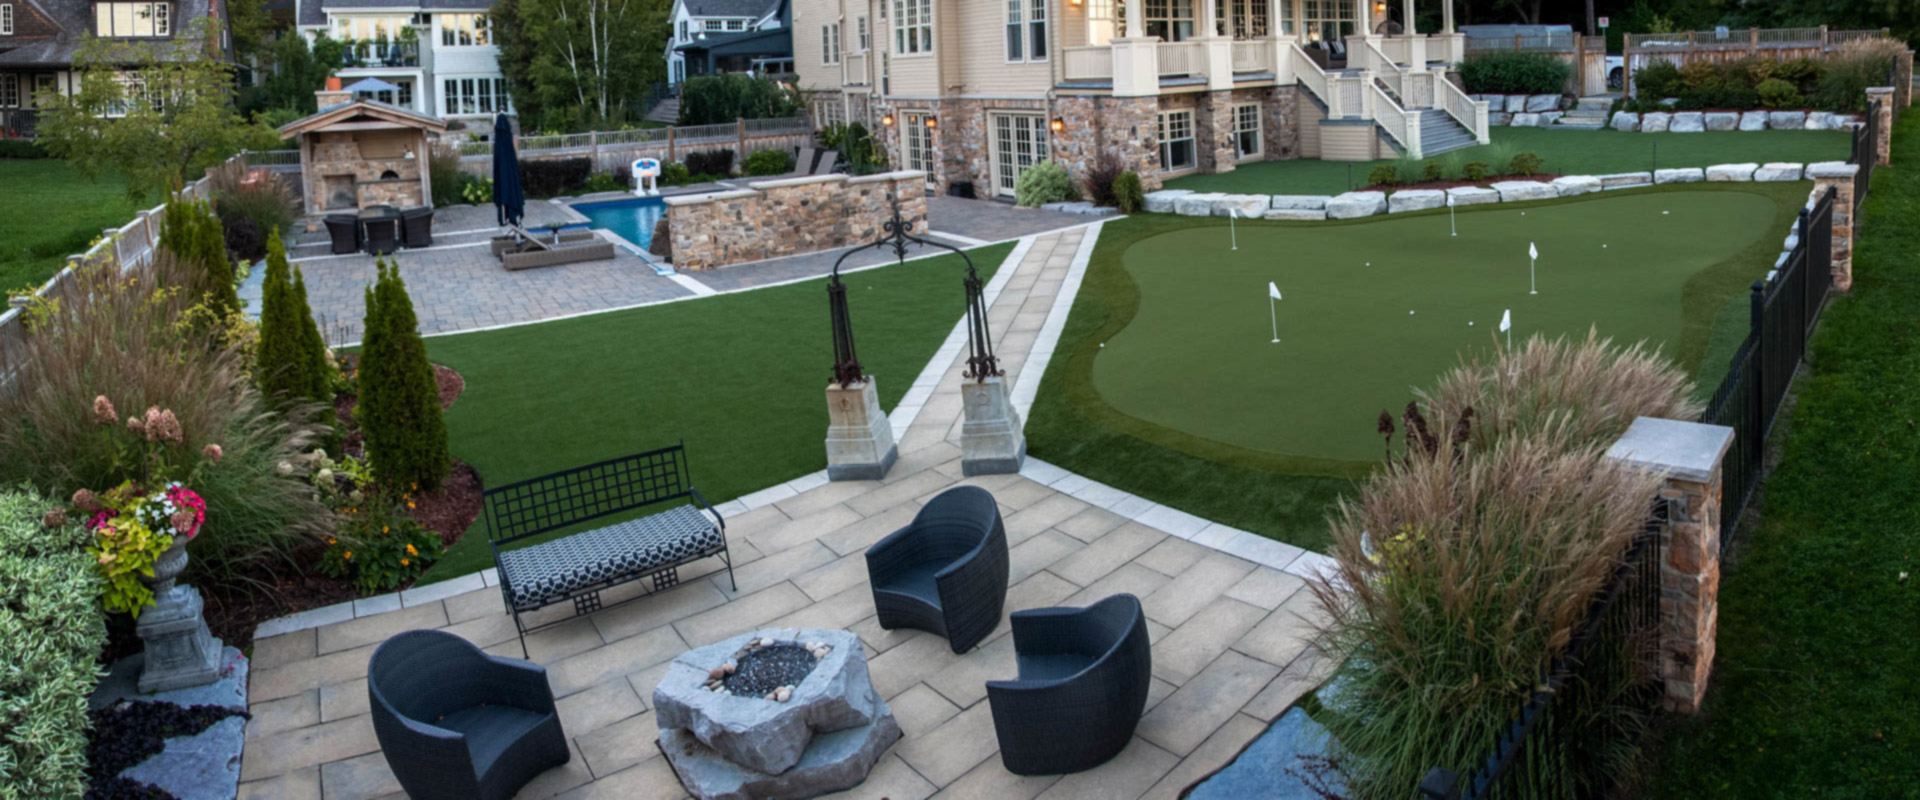 backyard with synlawn residential artificial turf